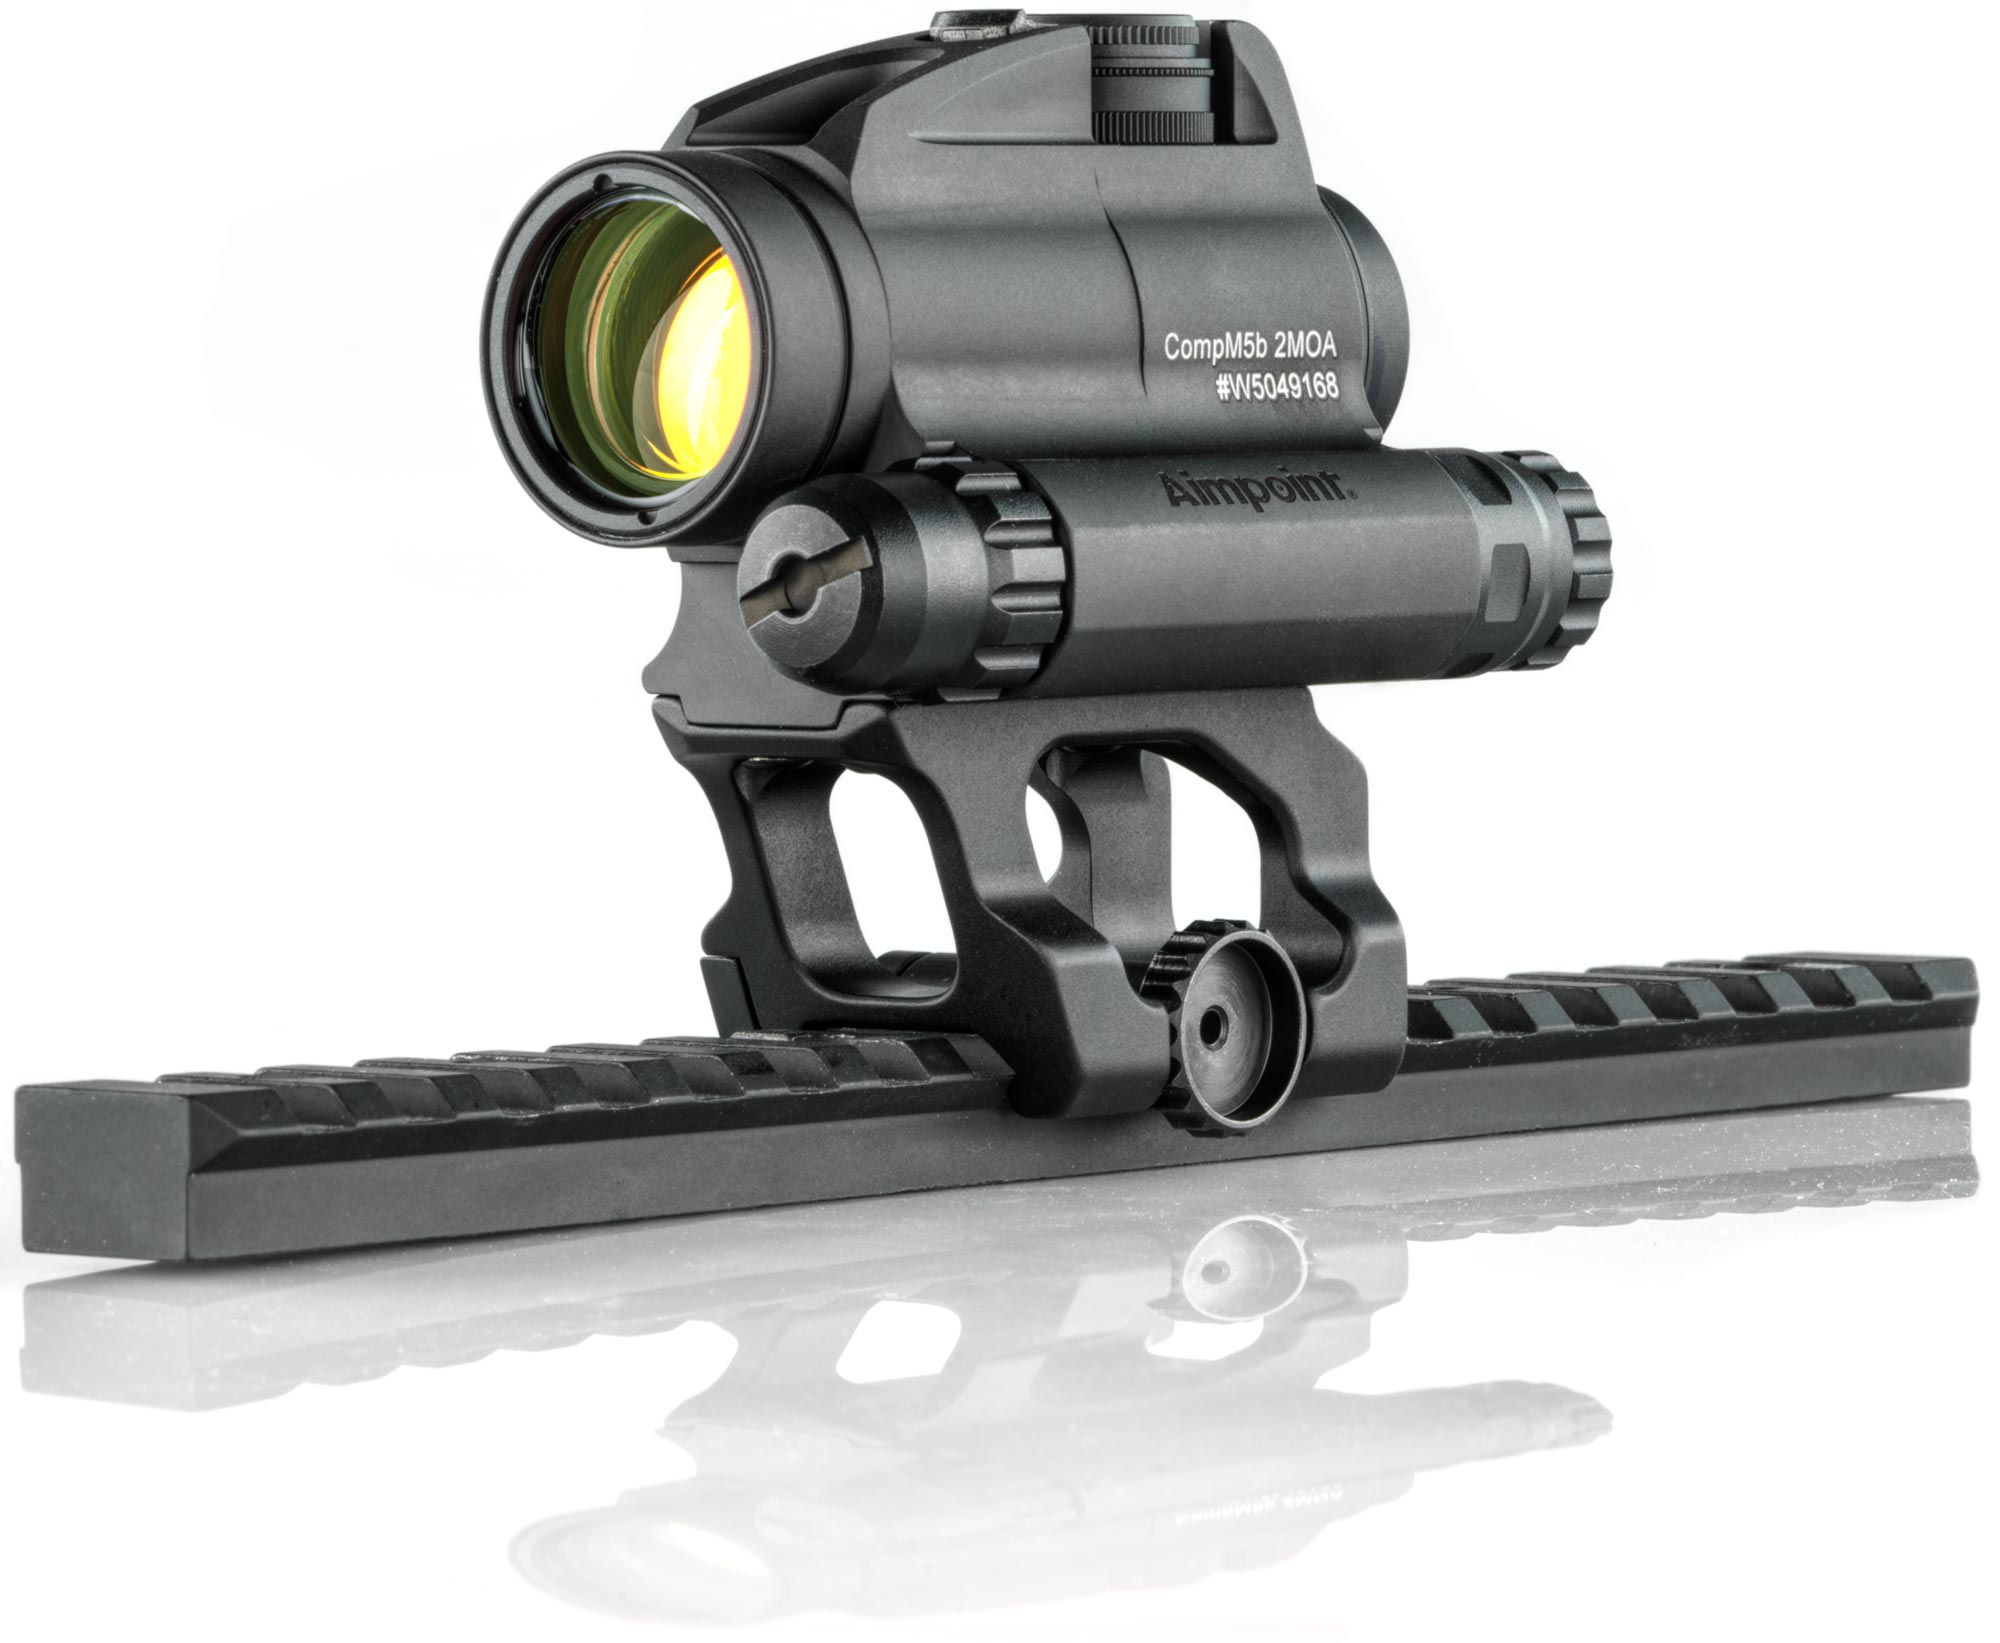 Scalarworks LEAP Aimpoint CompM5s mount